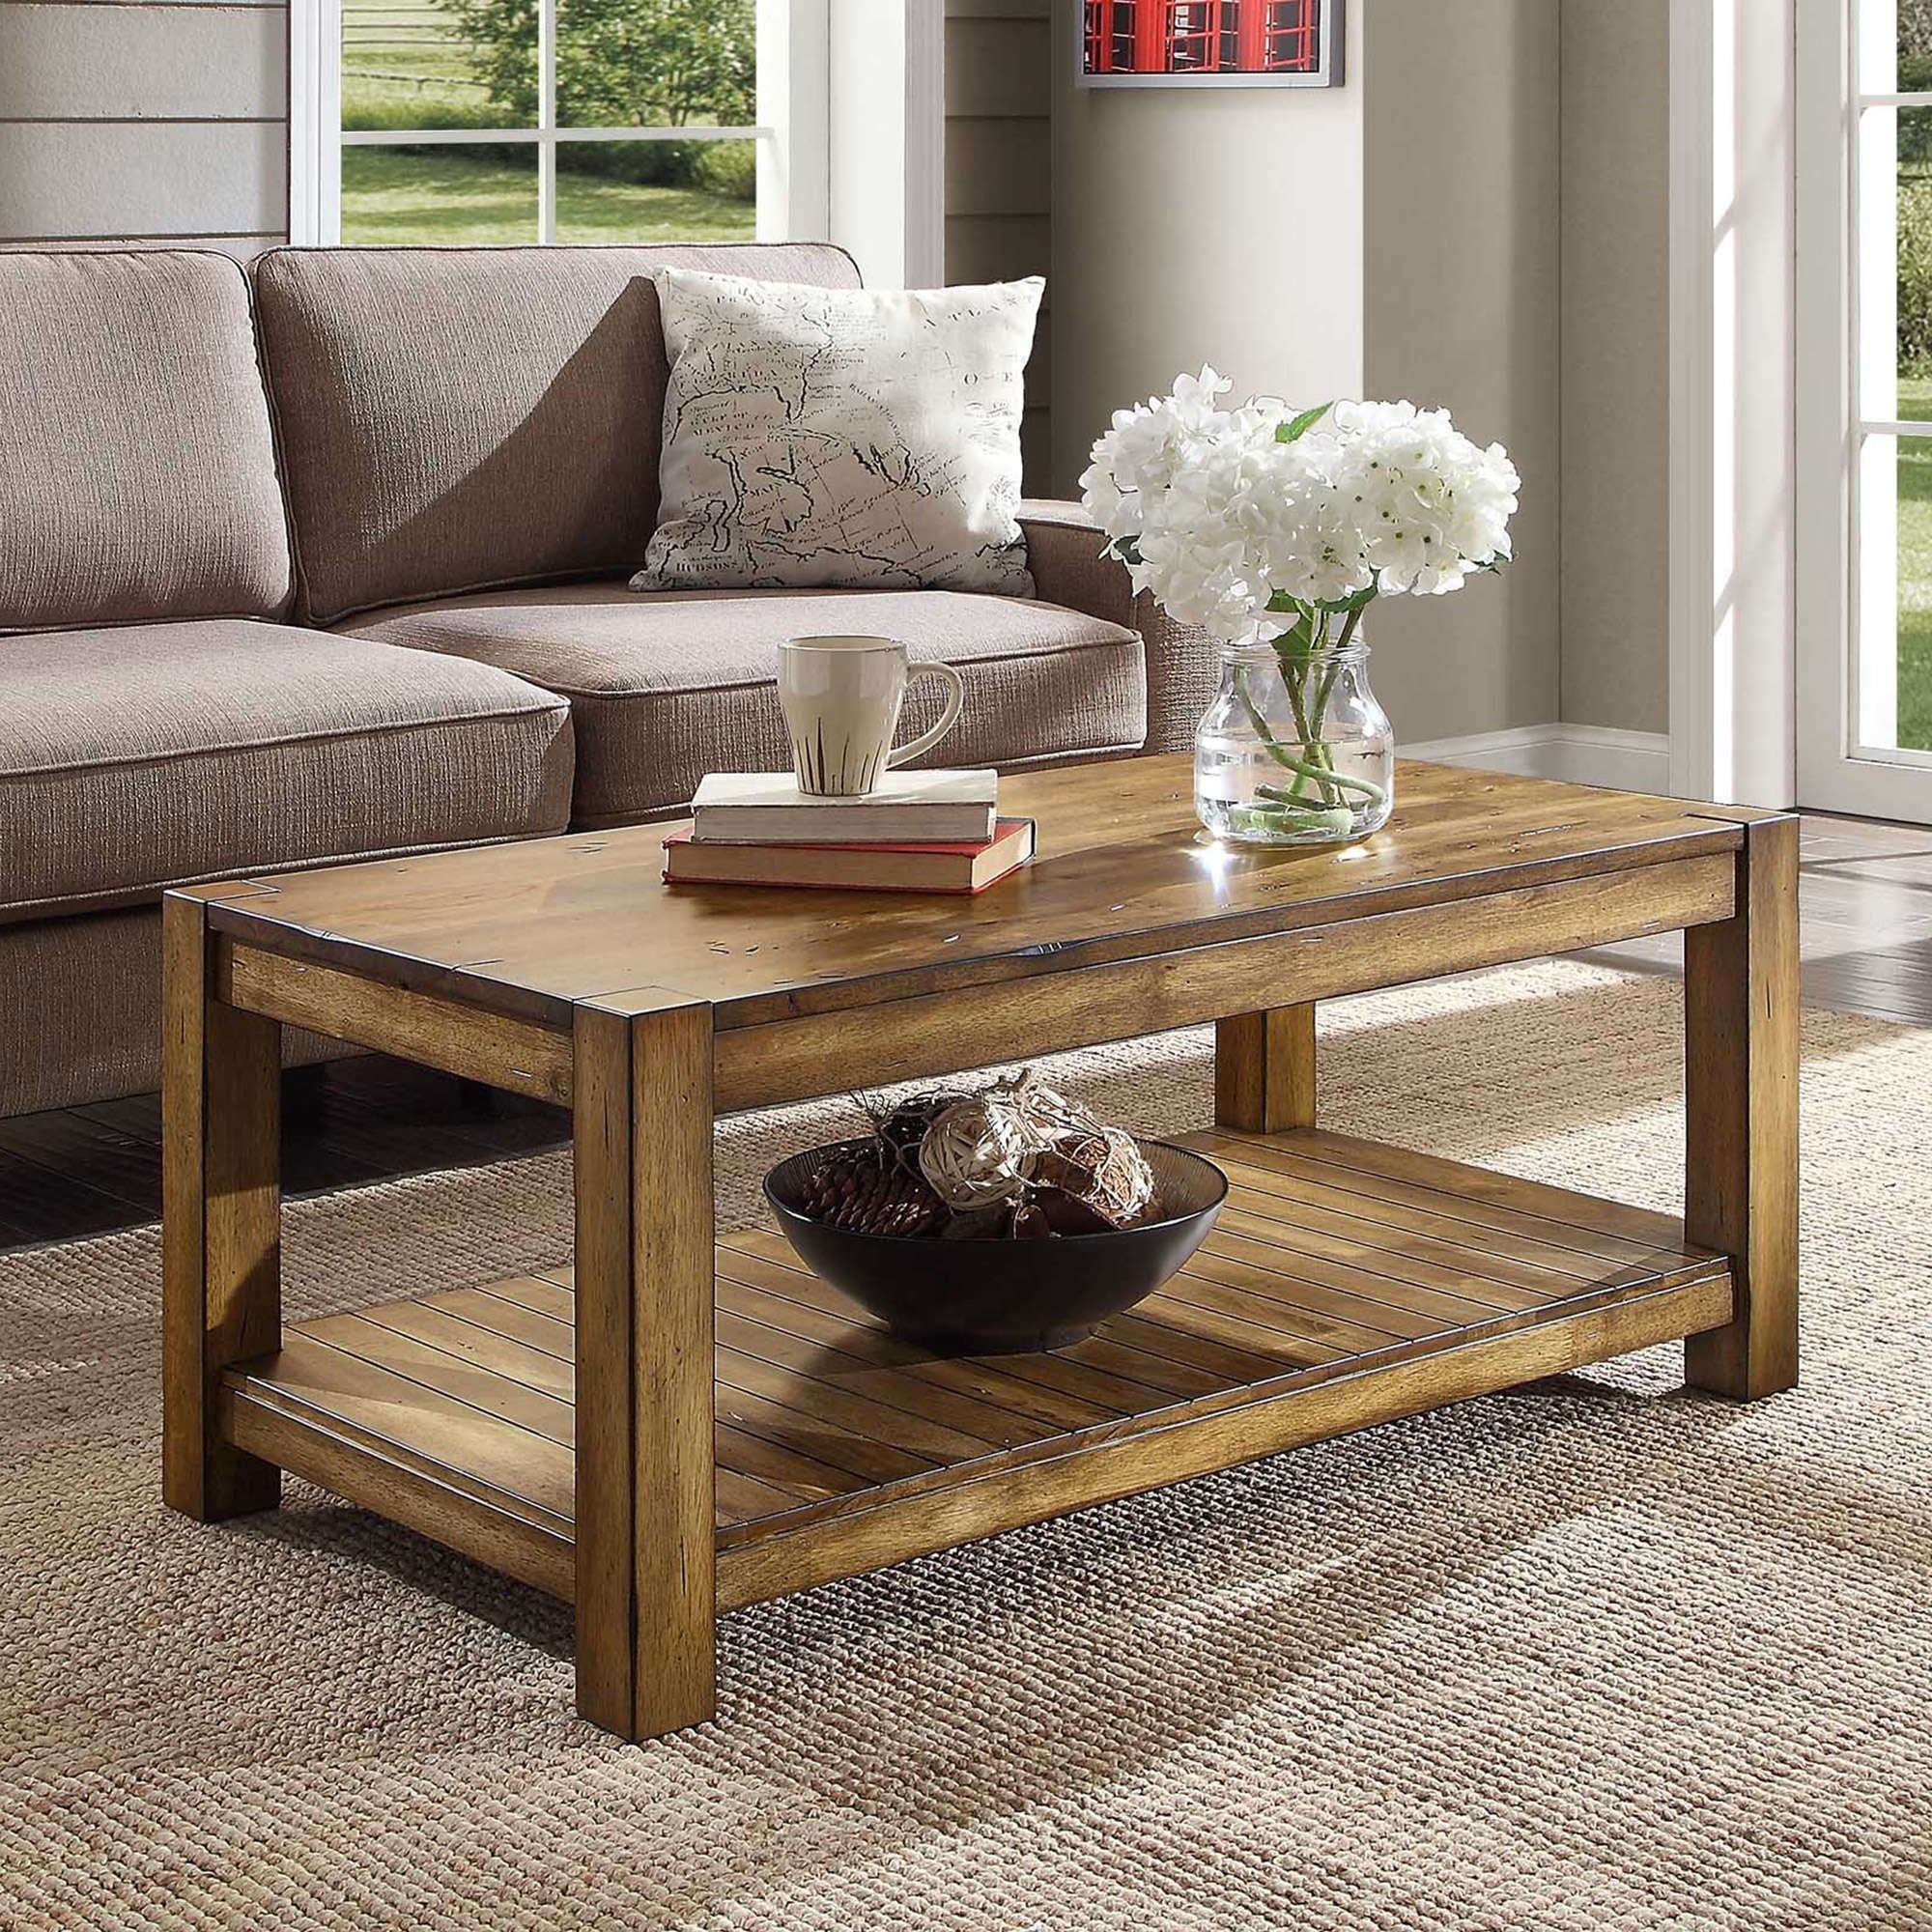 Bryant Solid Wood Coffee Table, Rustic Maple Brown Finish – Walmart For Rustic Wood Coffee Tables (View 4 of 15)